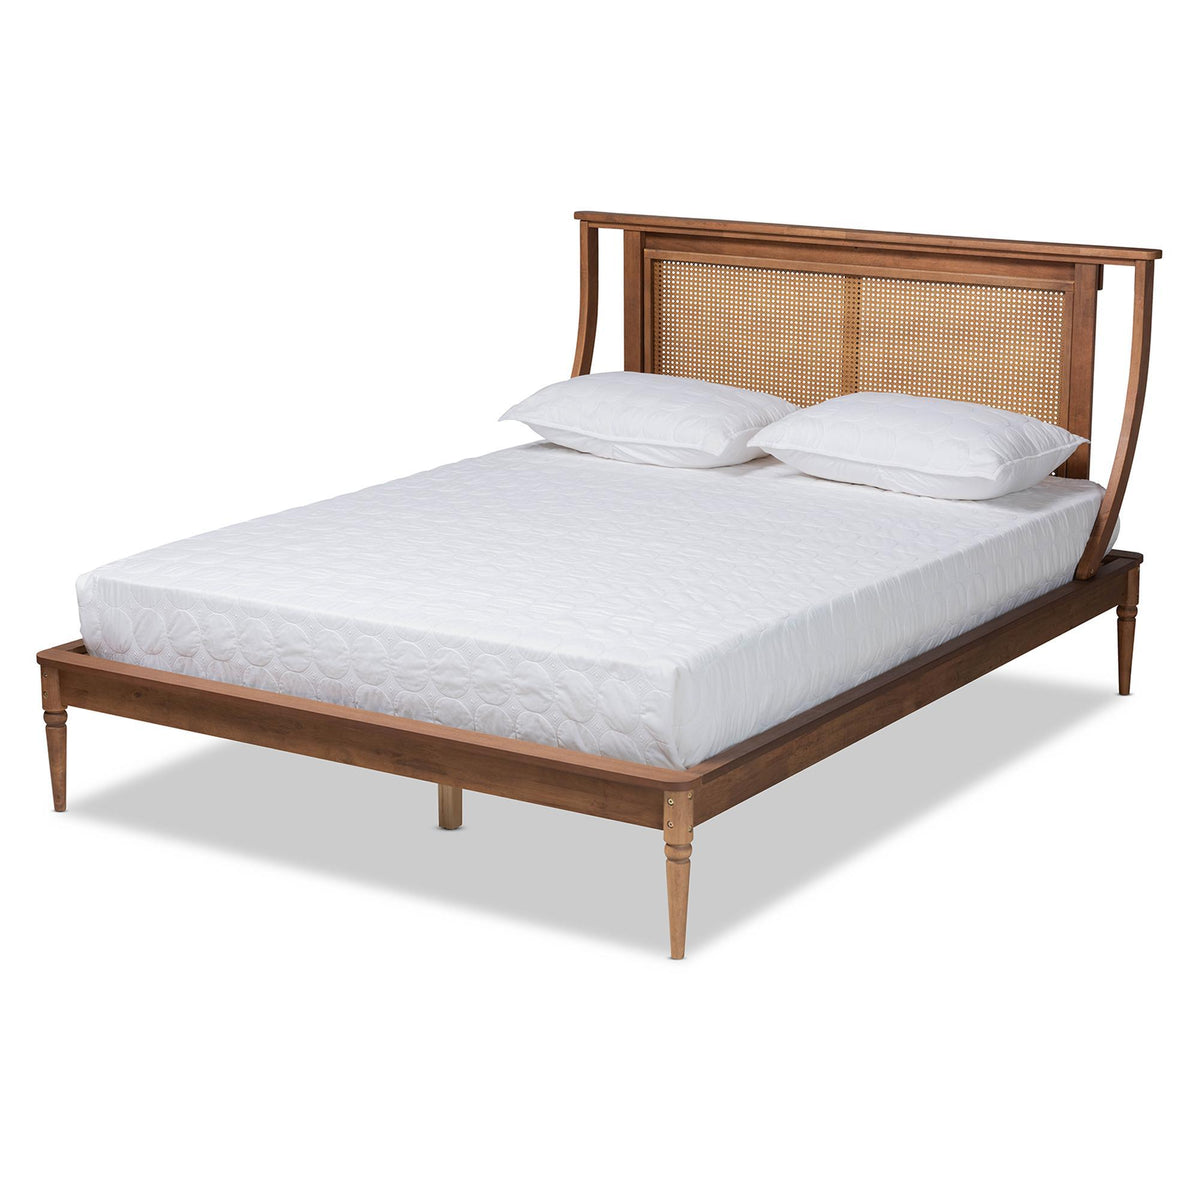 Baxton Studio Jamila Modern Transitional Walnut Brown Finished Wood And Synthetic Rattan Queen Size Platform Bed - MG0069-Rattan/Walnut-Queen